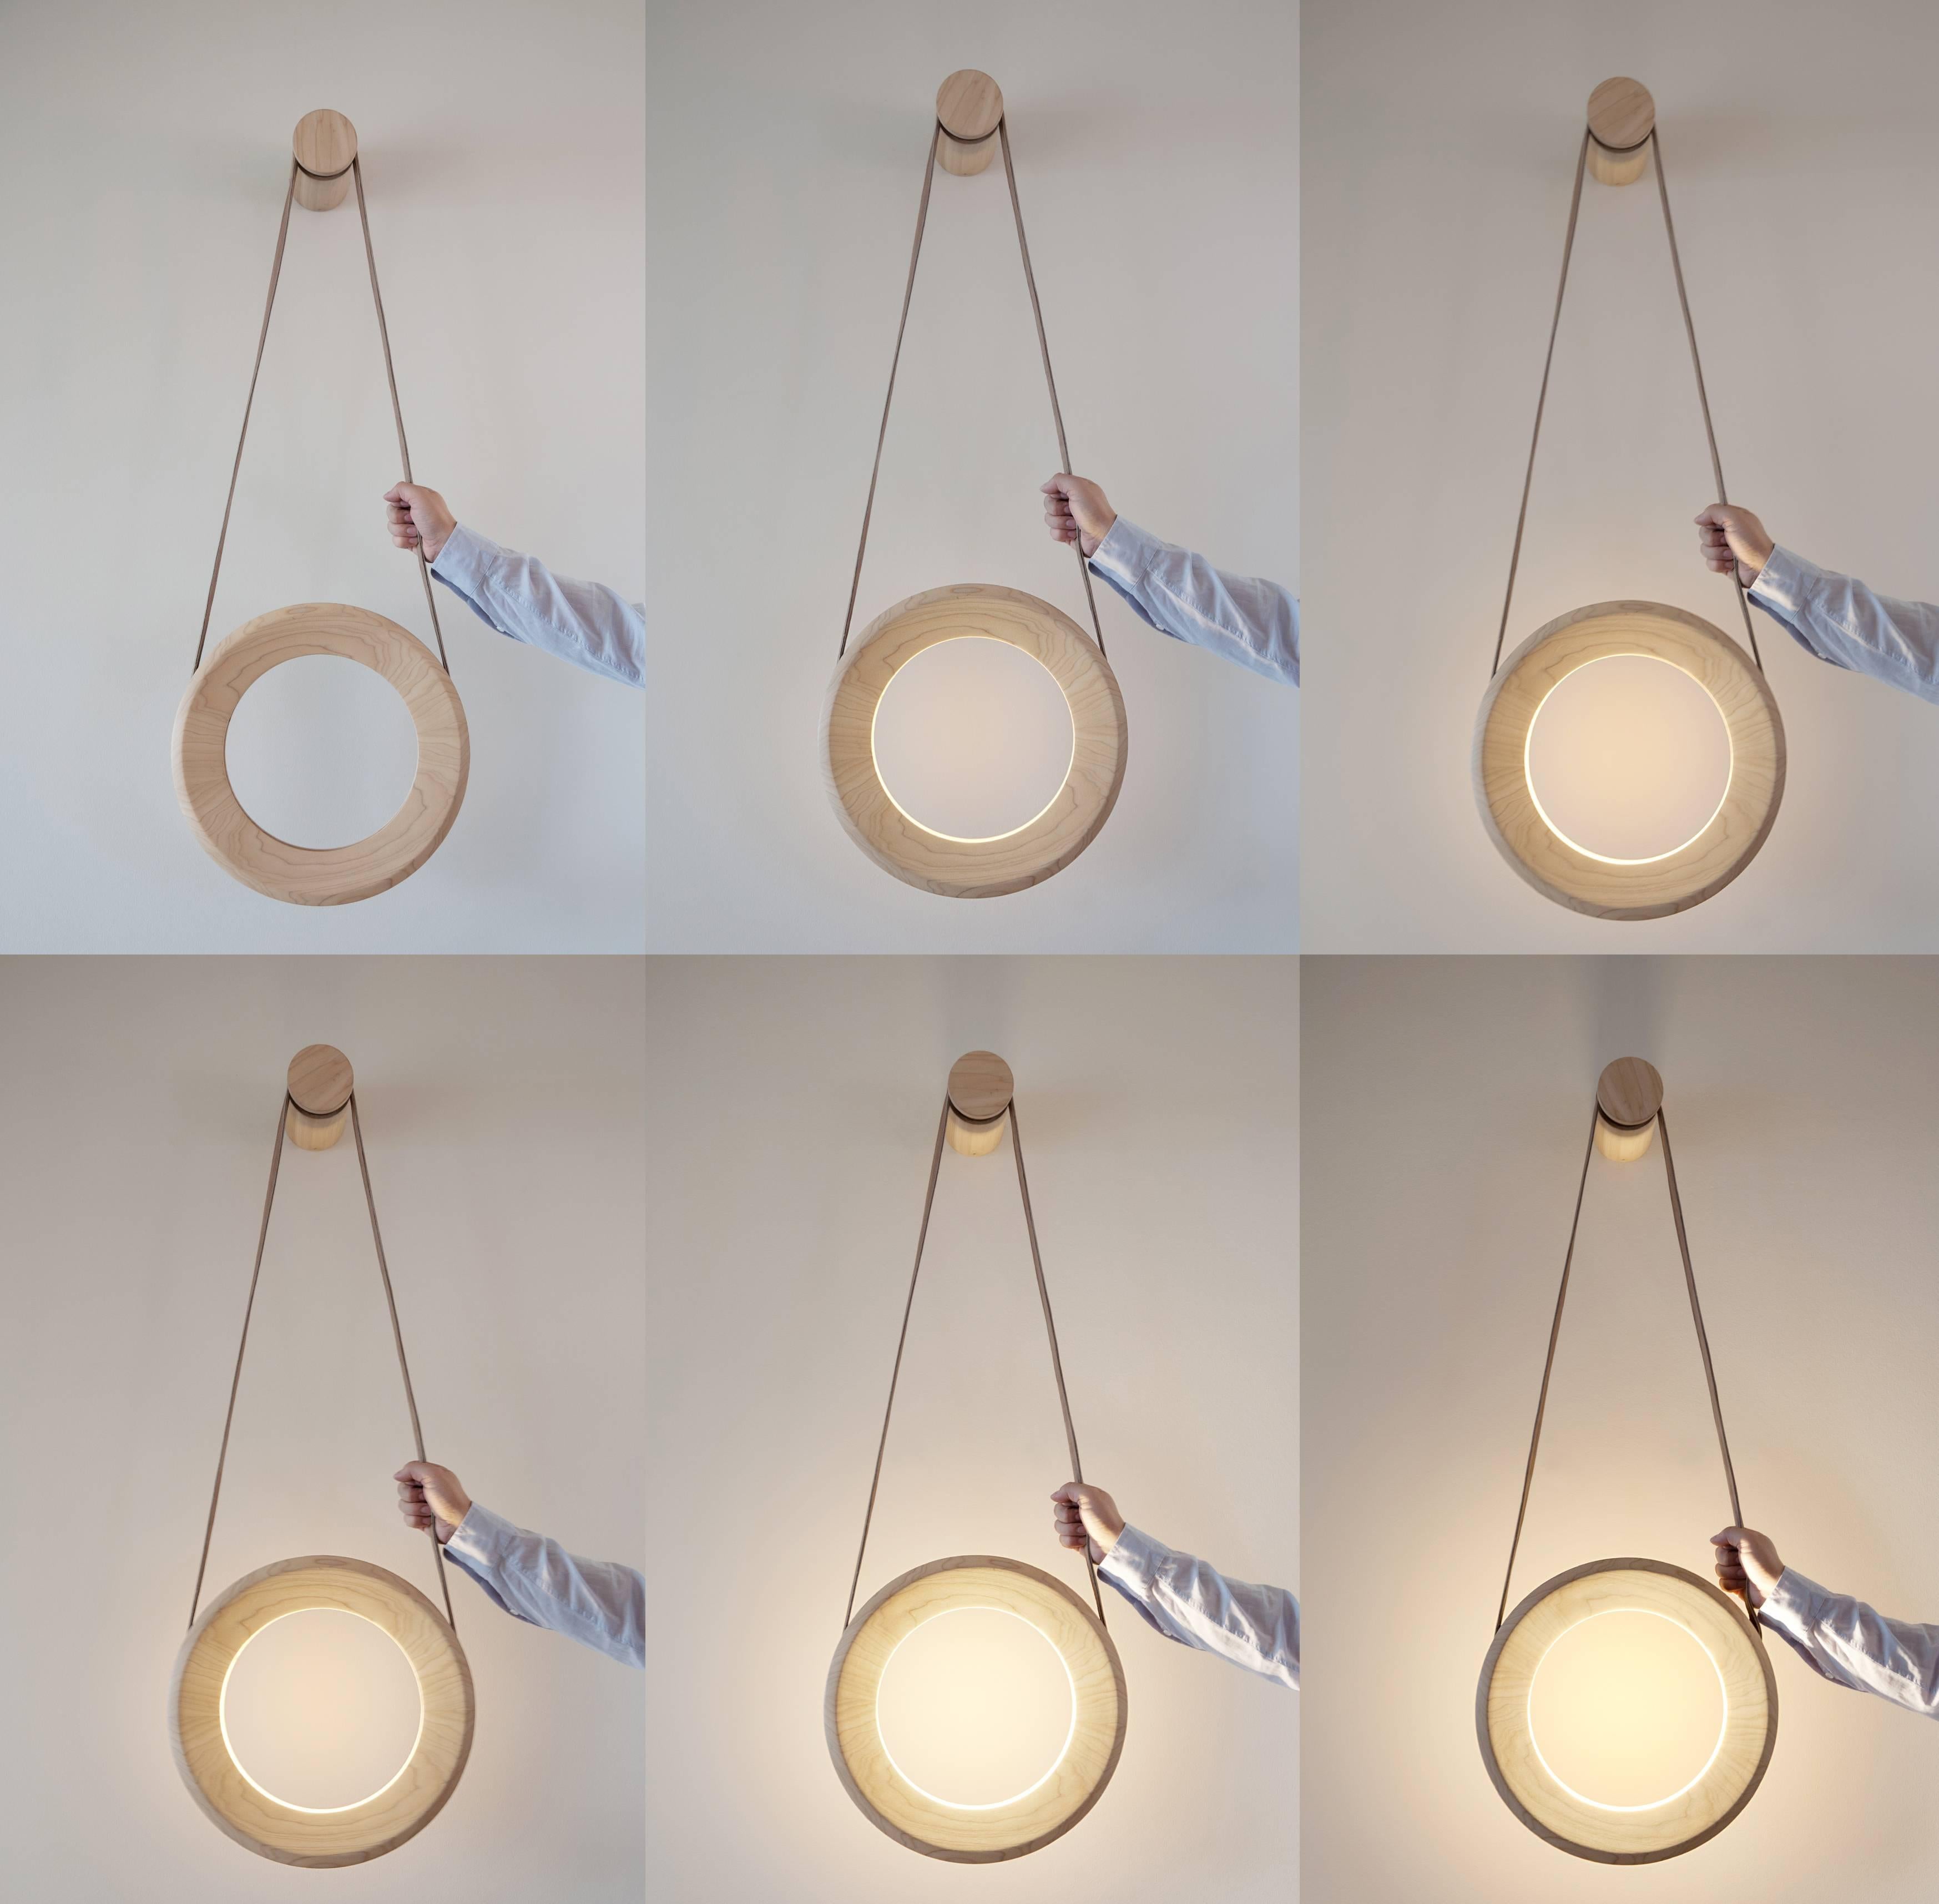 Halo lamp is award winning wall lamp designed to create a new and interesting link between the lamp and its user. There are no visible controls such as dimmer or a switch but instead they are integrated into the lamp itself. This means that in order